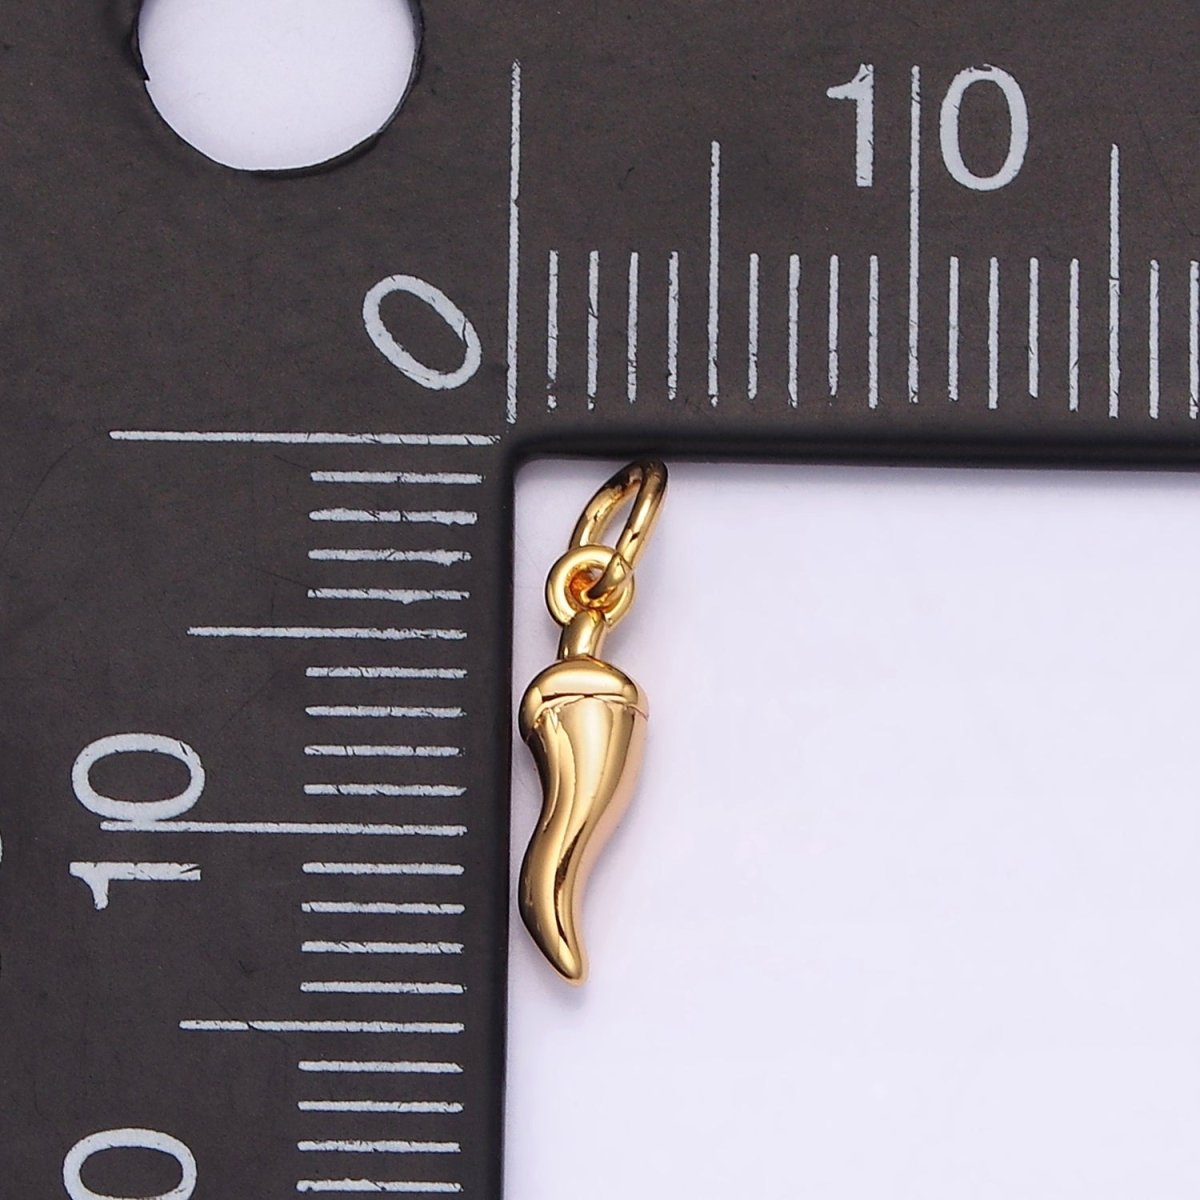 18K Gold Filled 11mm Chili Fruit Puffed Add-On Charm | N1764 - DLUXCA